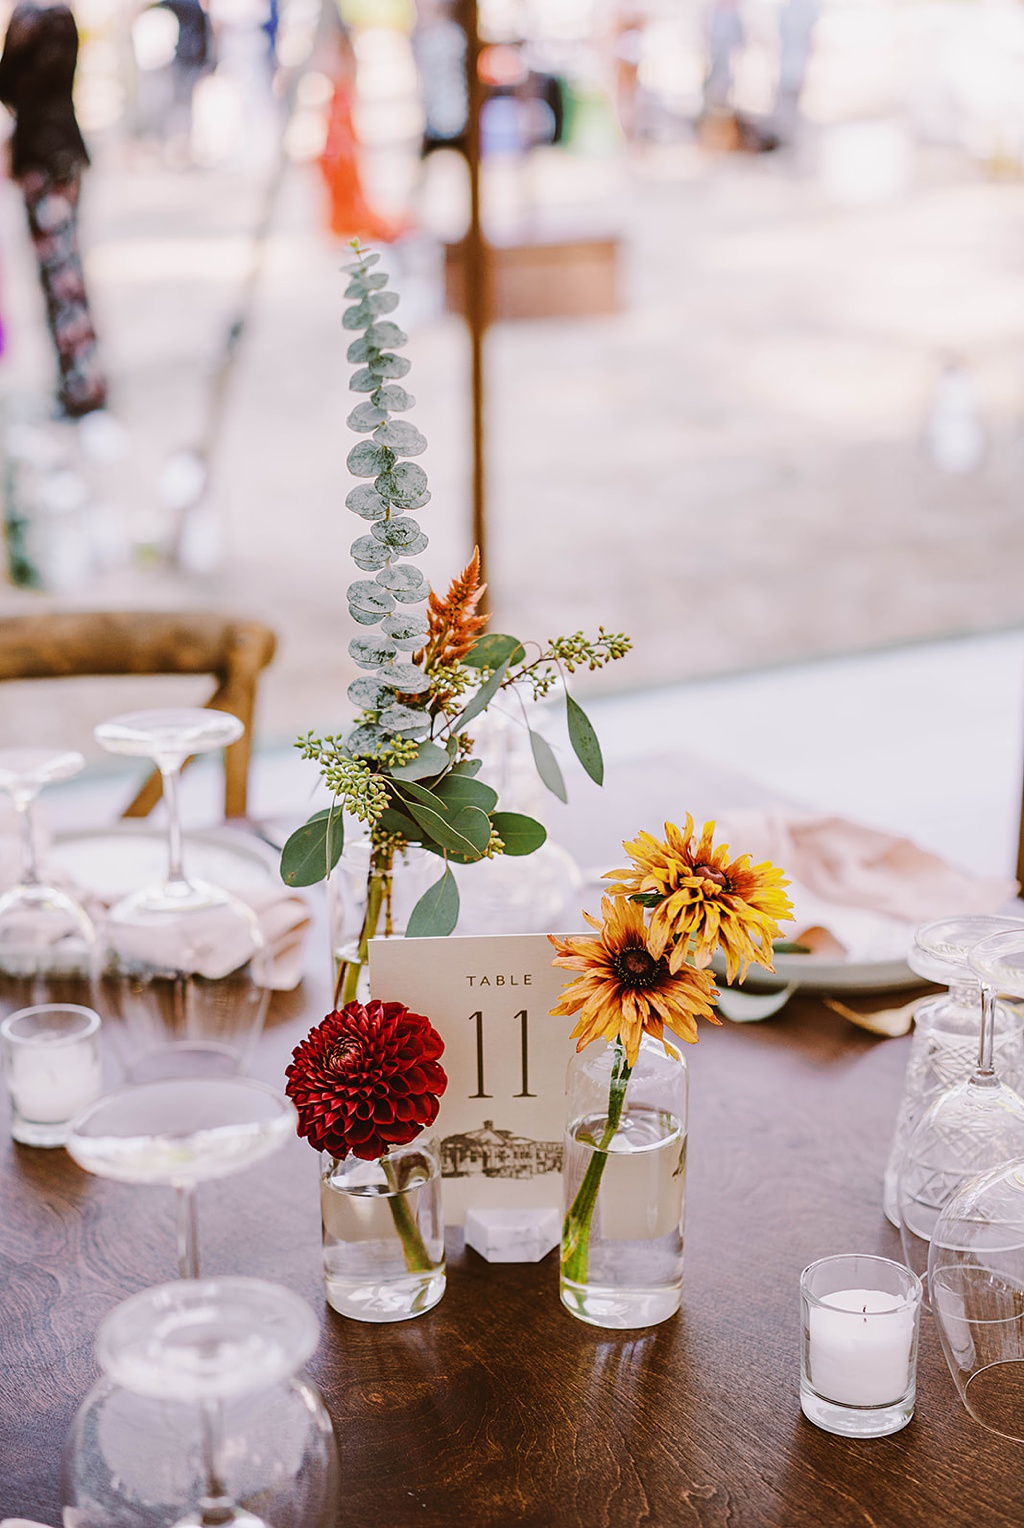 A table is set with bud vases, glassware, and candles for this summer wedding